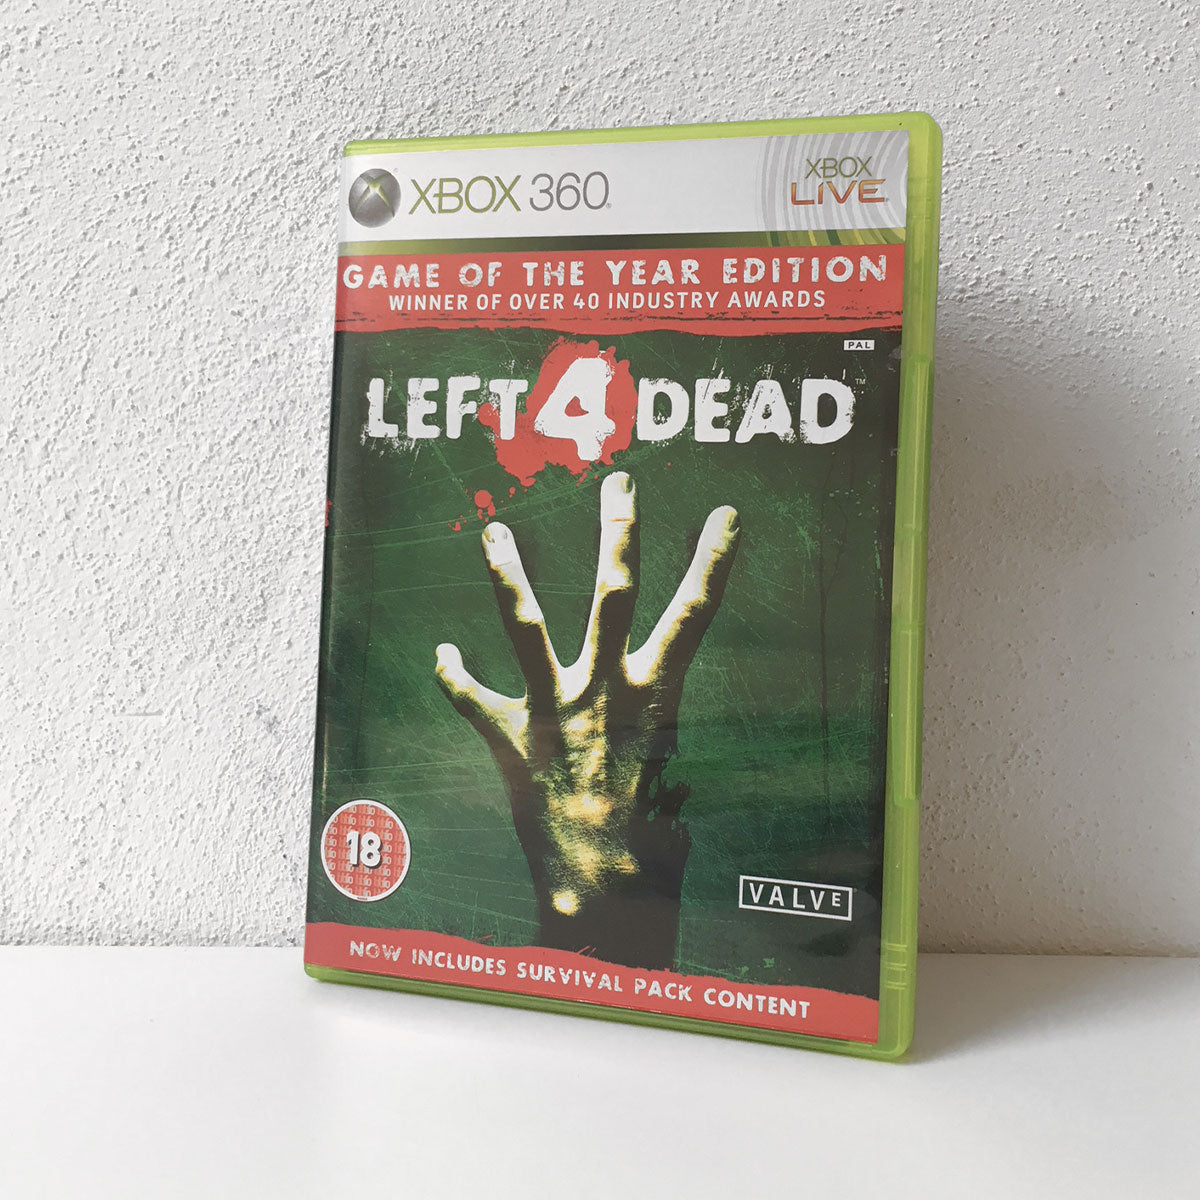 Left 4 Dead Game of the Year